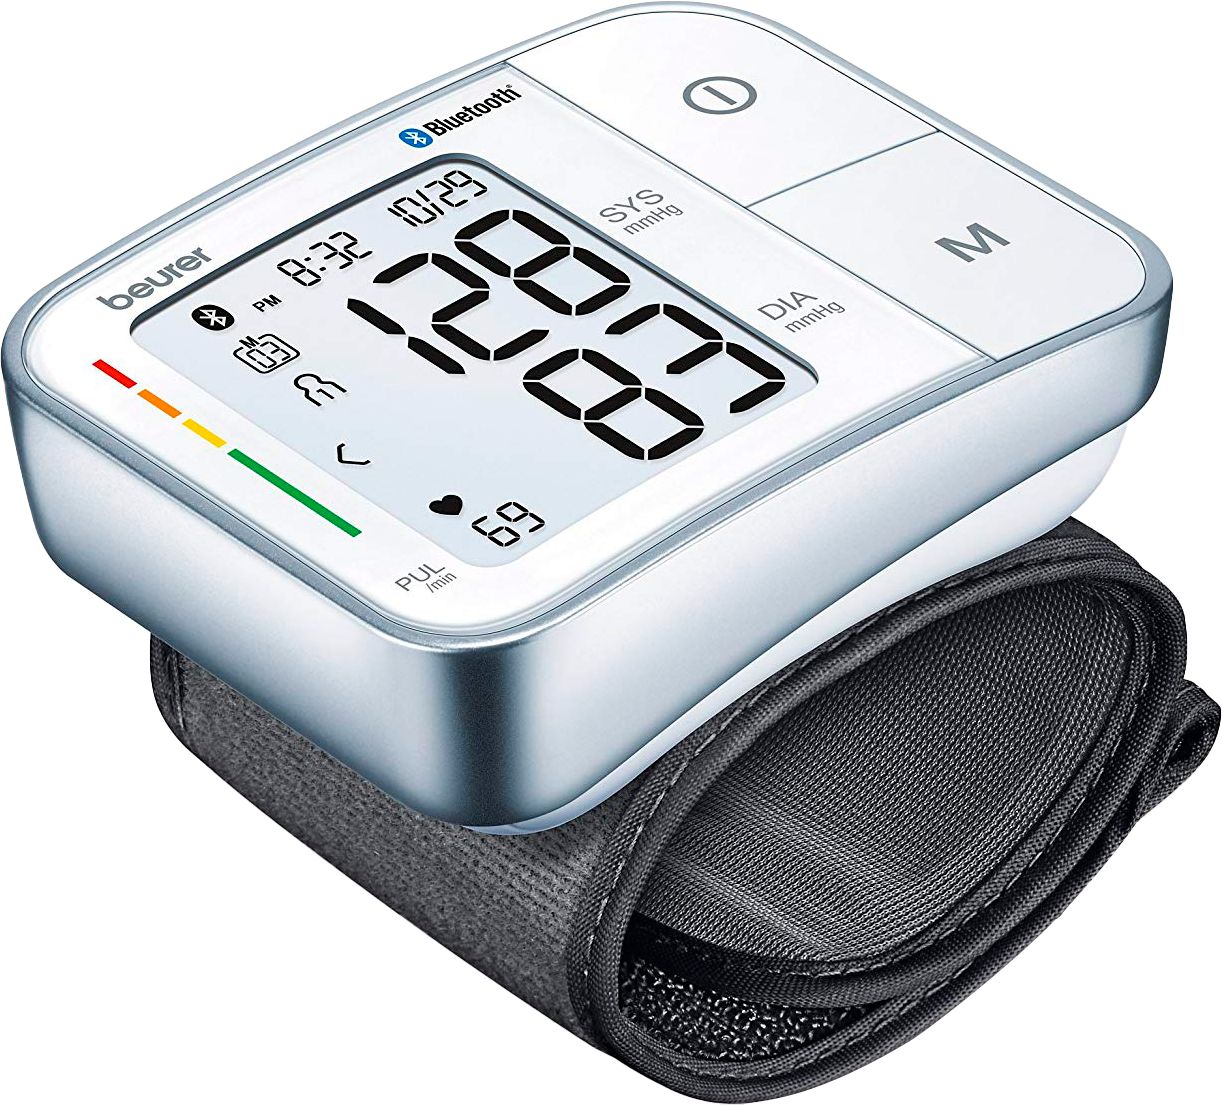 Getting Started: Beurer Blood Pressure Monitor (BM 57) – Support PLUX  Biosignals official